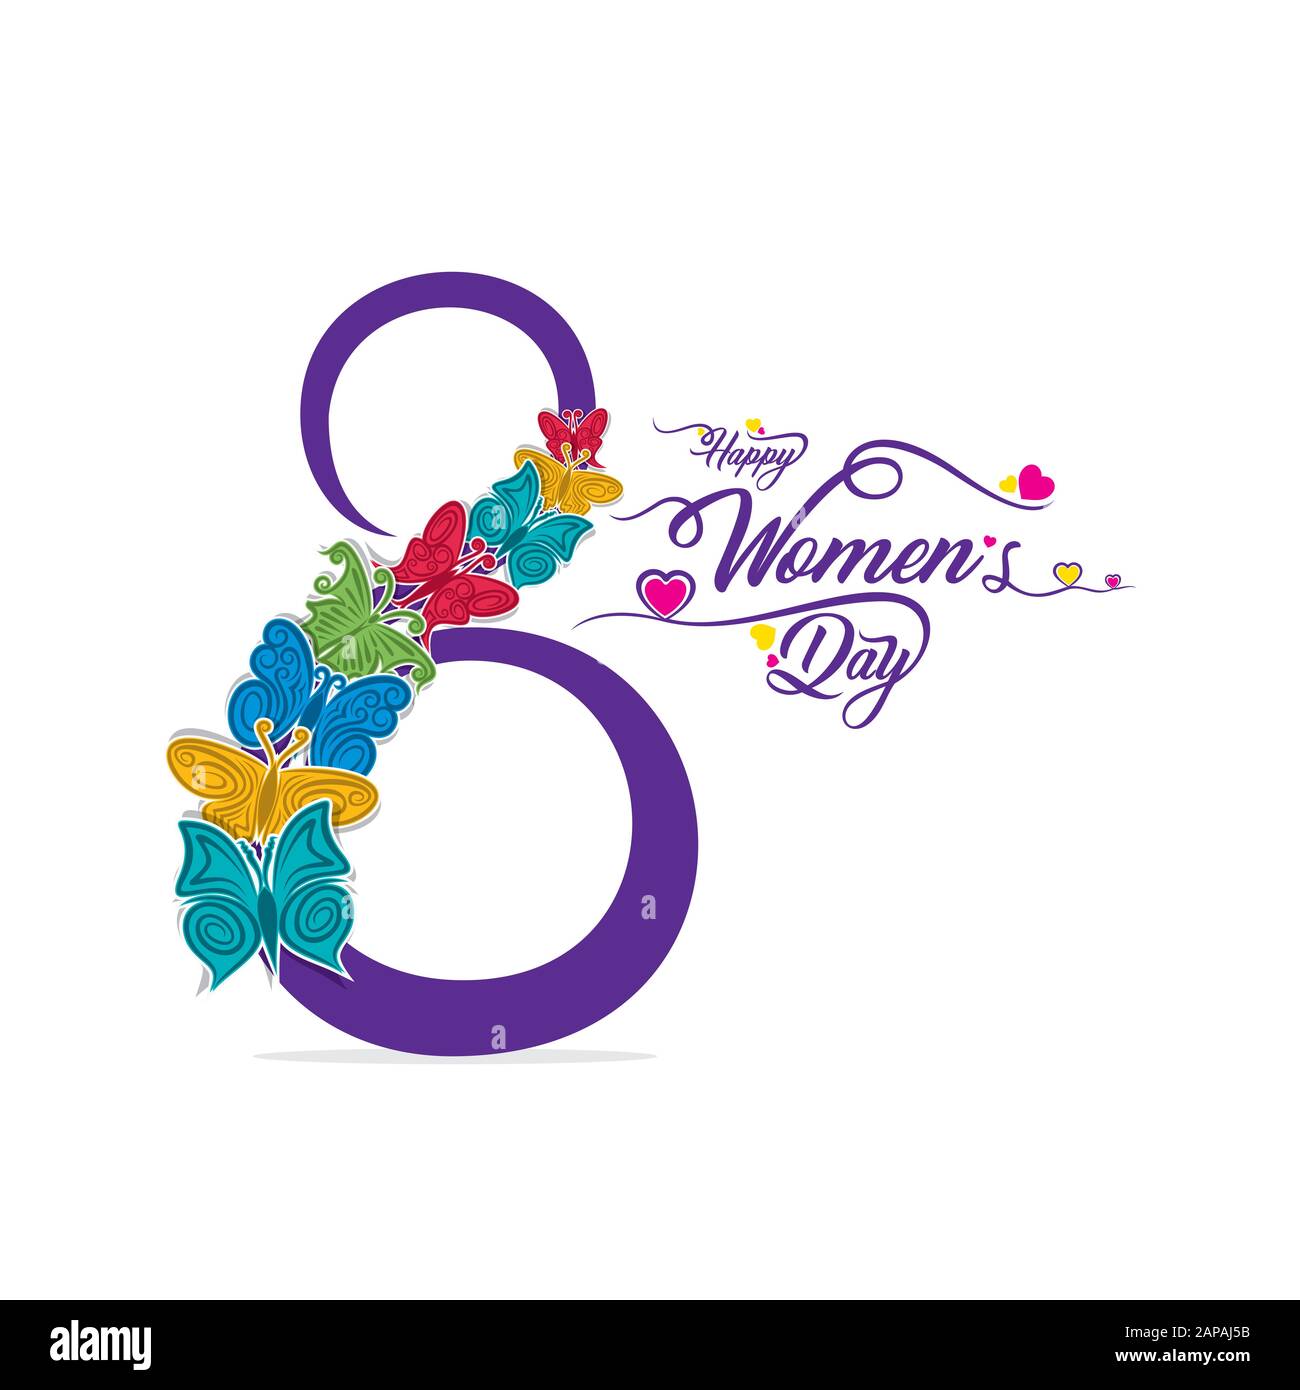 Happy women's day greeting card design,creative butterfly design ...